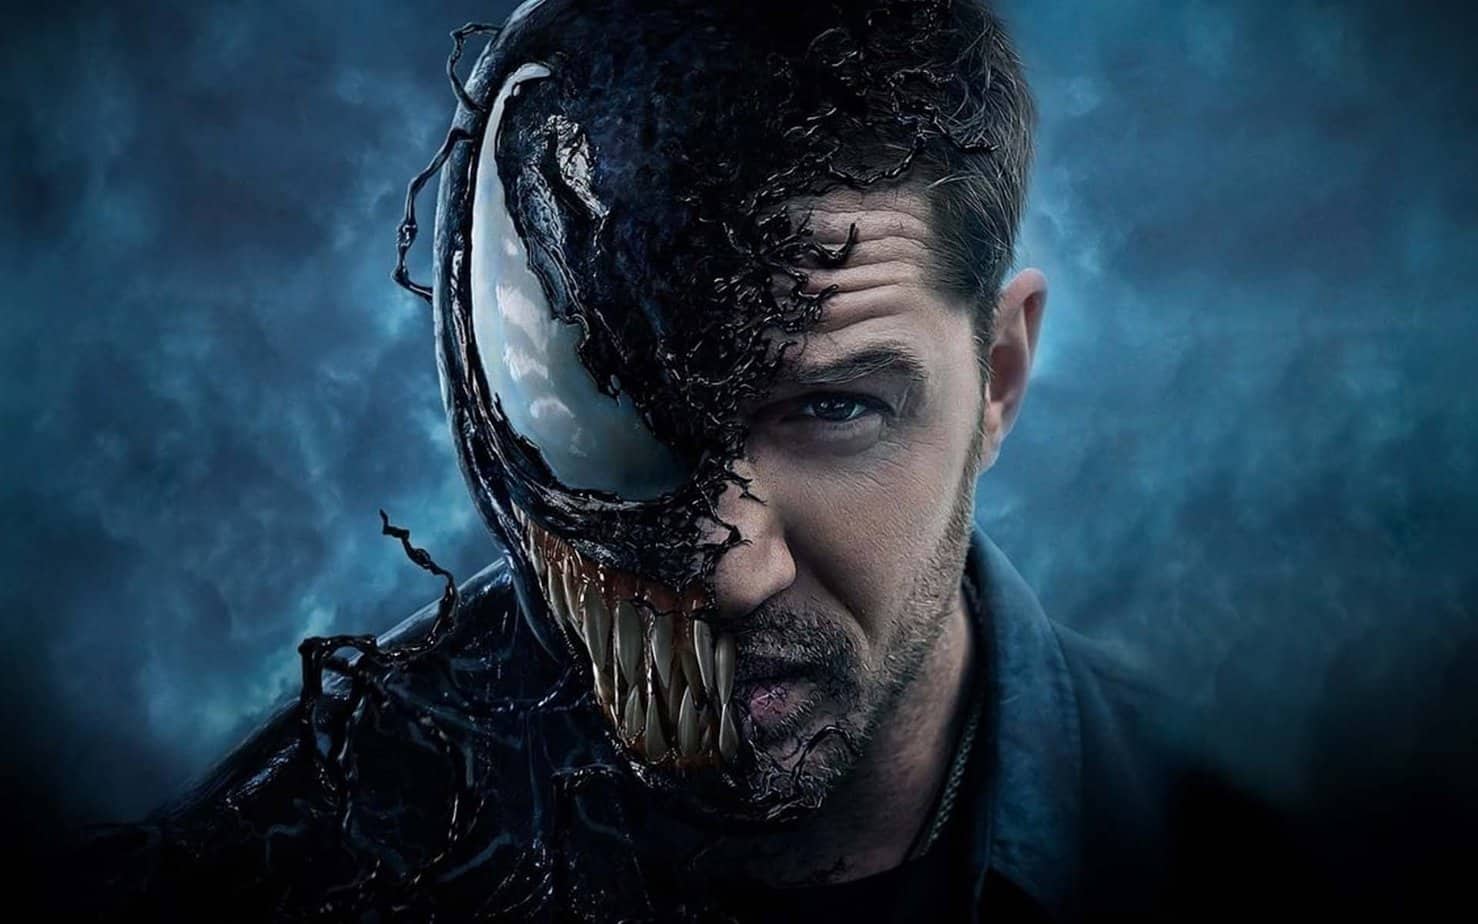 Why is Venom Trending? - video on social media has people freaking out